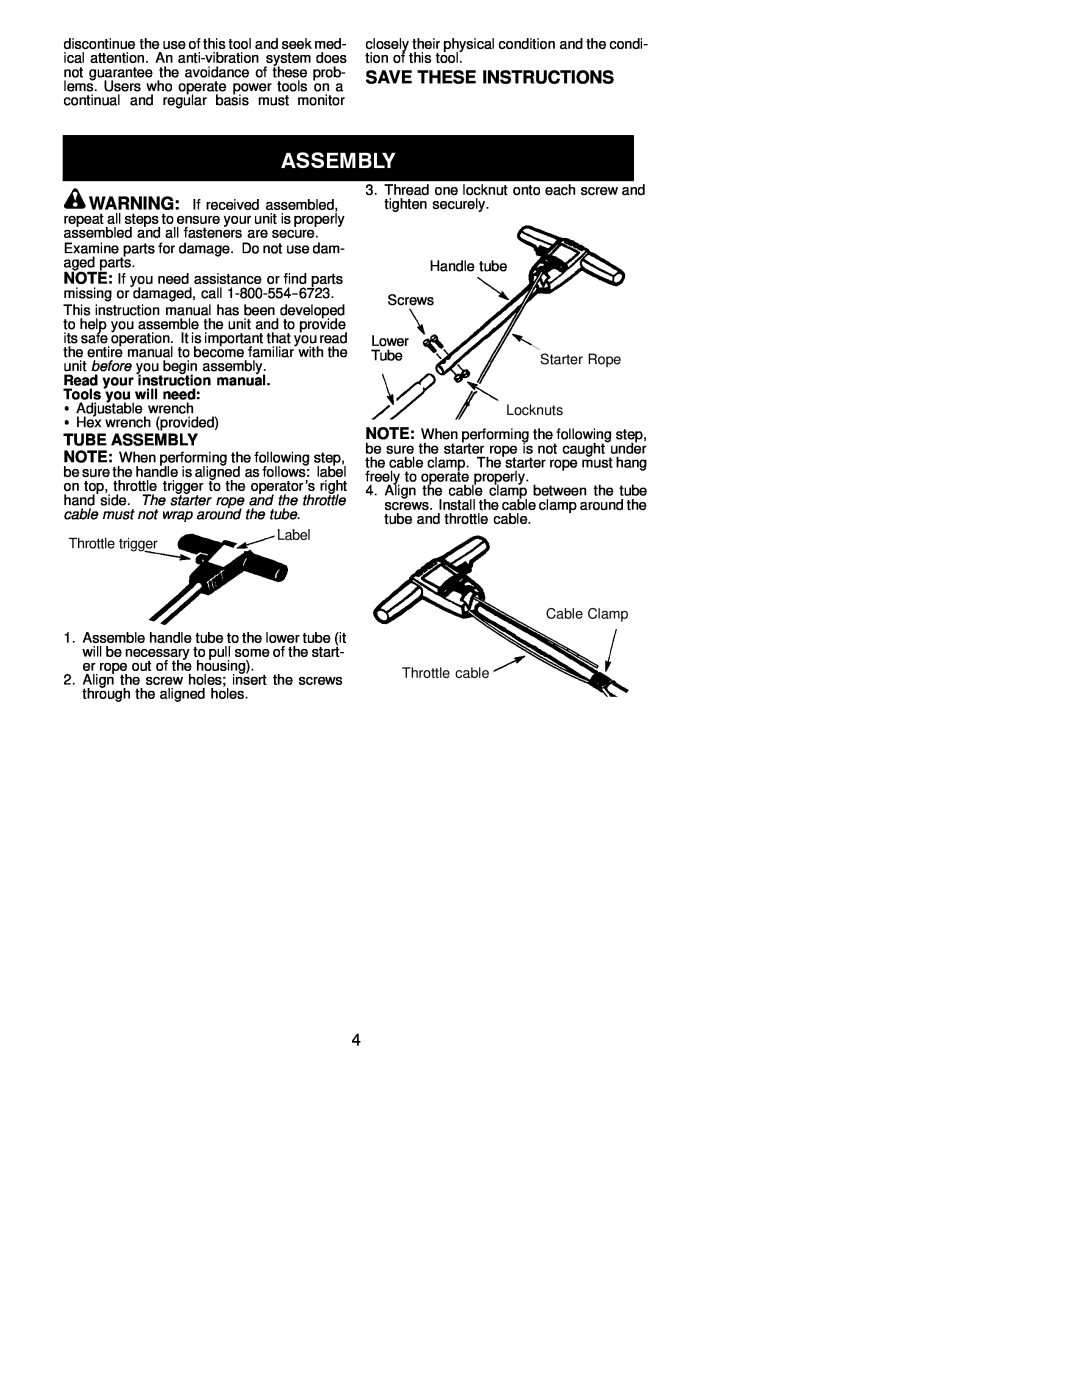 Poulan PE550 instruction manual Save These Instructions, Tube Assembly 